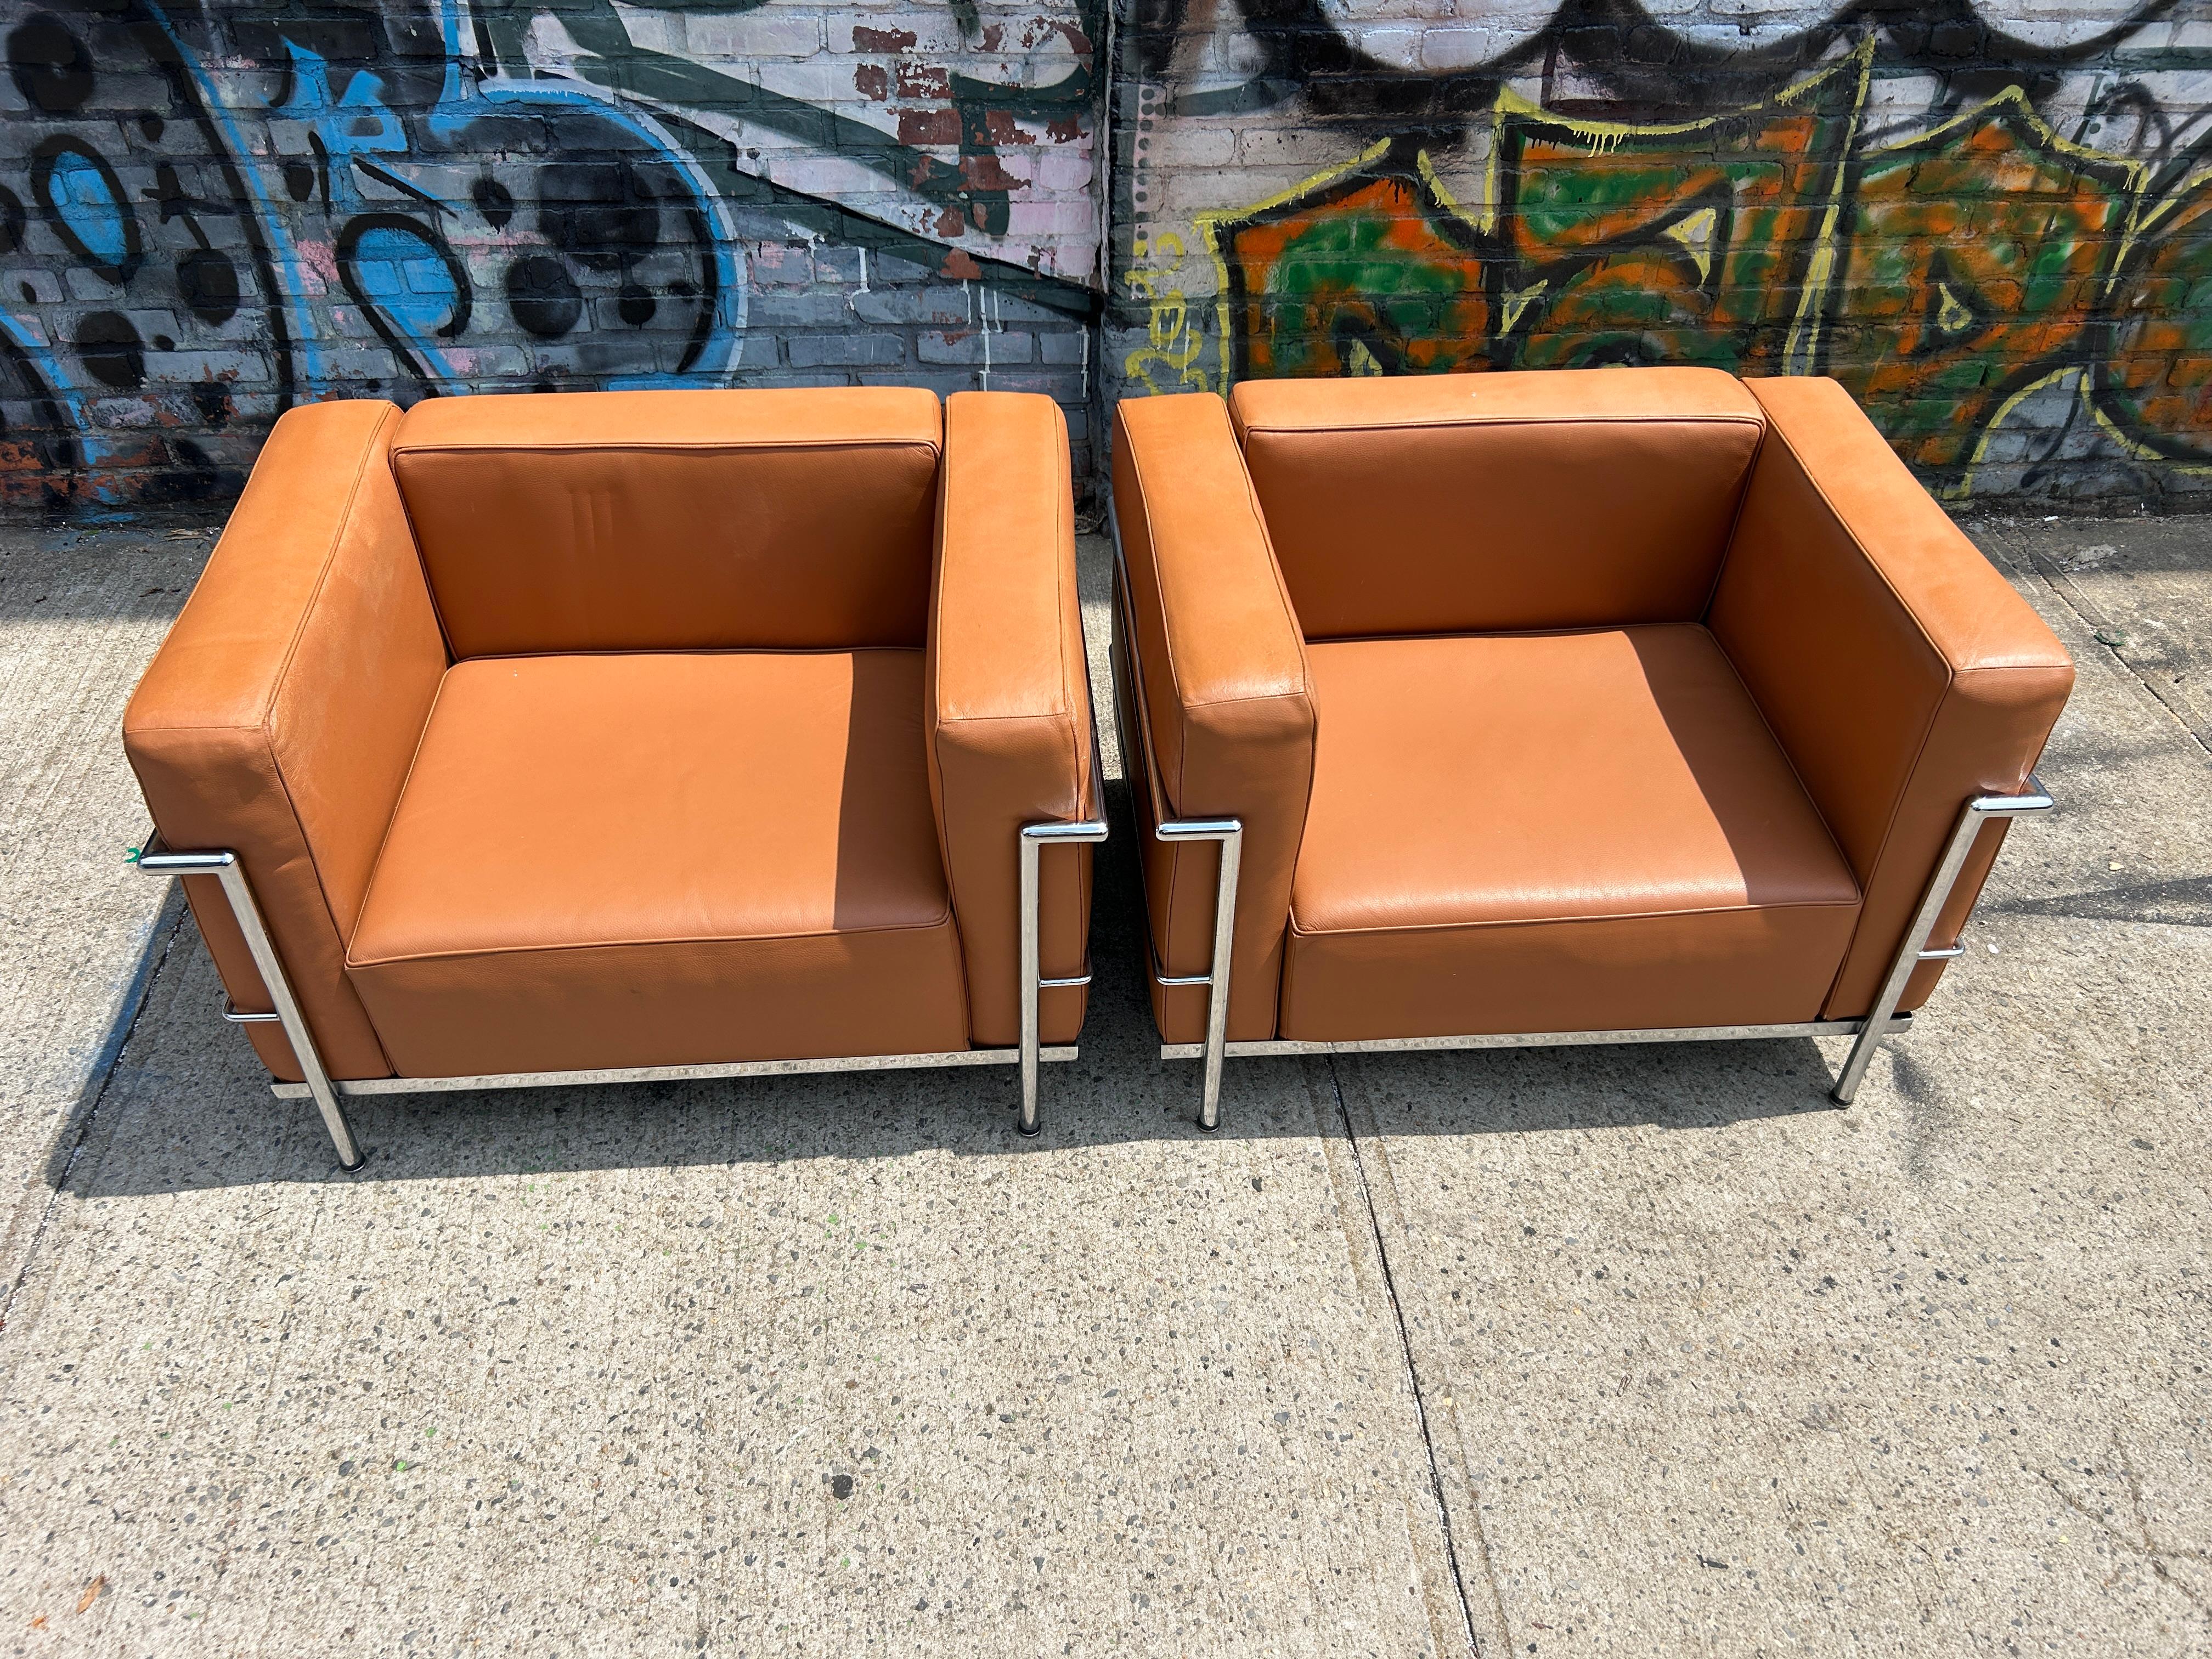 A pair of Vintage lounge or club chairs by Le Corbusier. Wide Model LC3 in Tan Leather. Triple chrome plated steel frame. Show normal signs of use on top of arms from over the years. Manufactured by Gordon International. All straps are good all